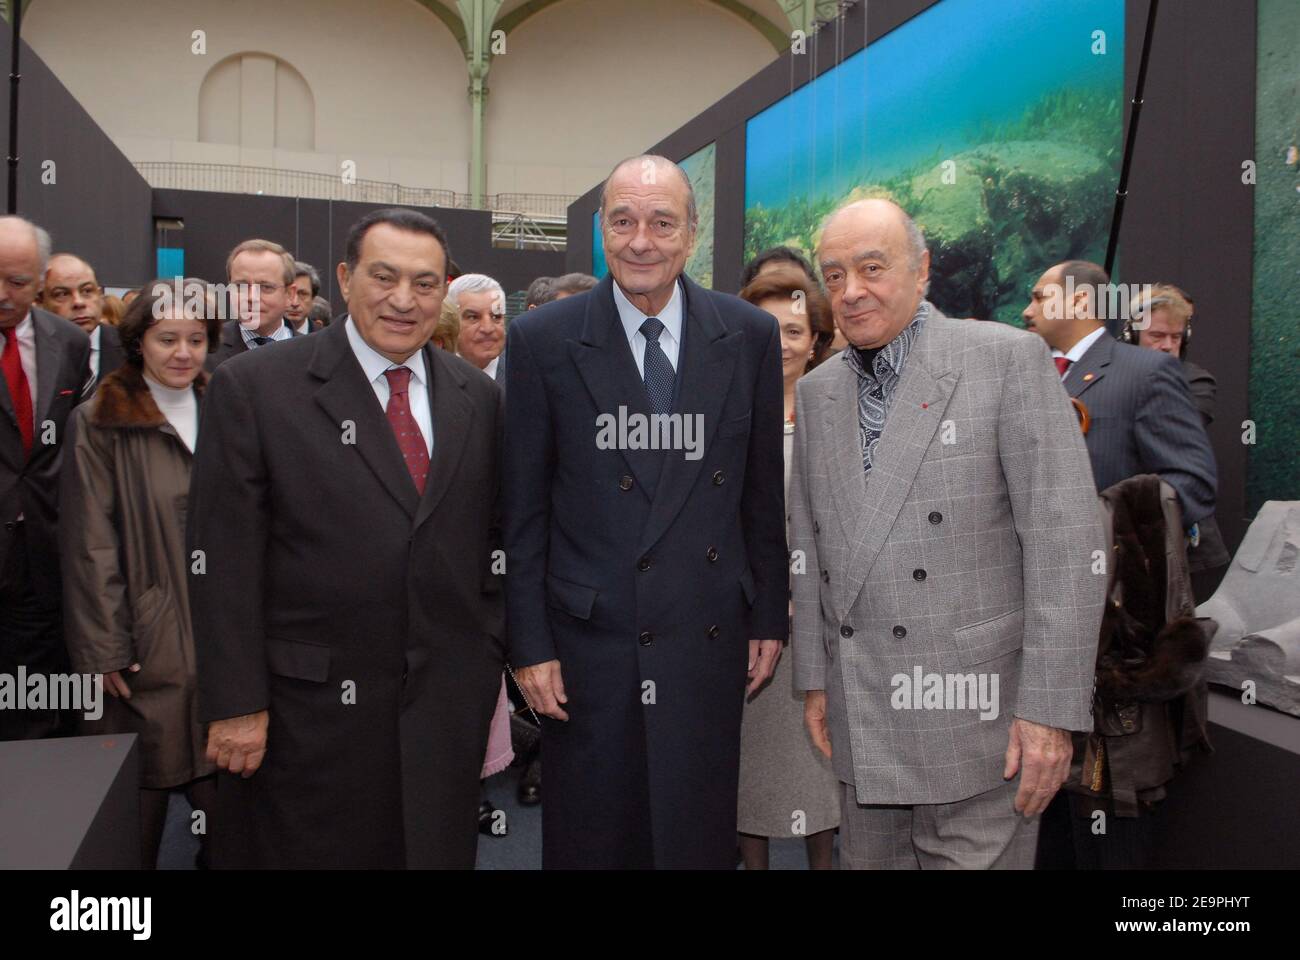 French President Jacques Chirac, Egyptian President Hosni Mubarak, with businessman Mohammed Al Fayed, during the opening of the exhibition 'Sunken Treasures of Egypt', at the Grand Palais in Paris on December 8, 2006. Photo by Ammar Abd Rabbo/ABACAPRESS.COM Stock Photo